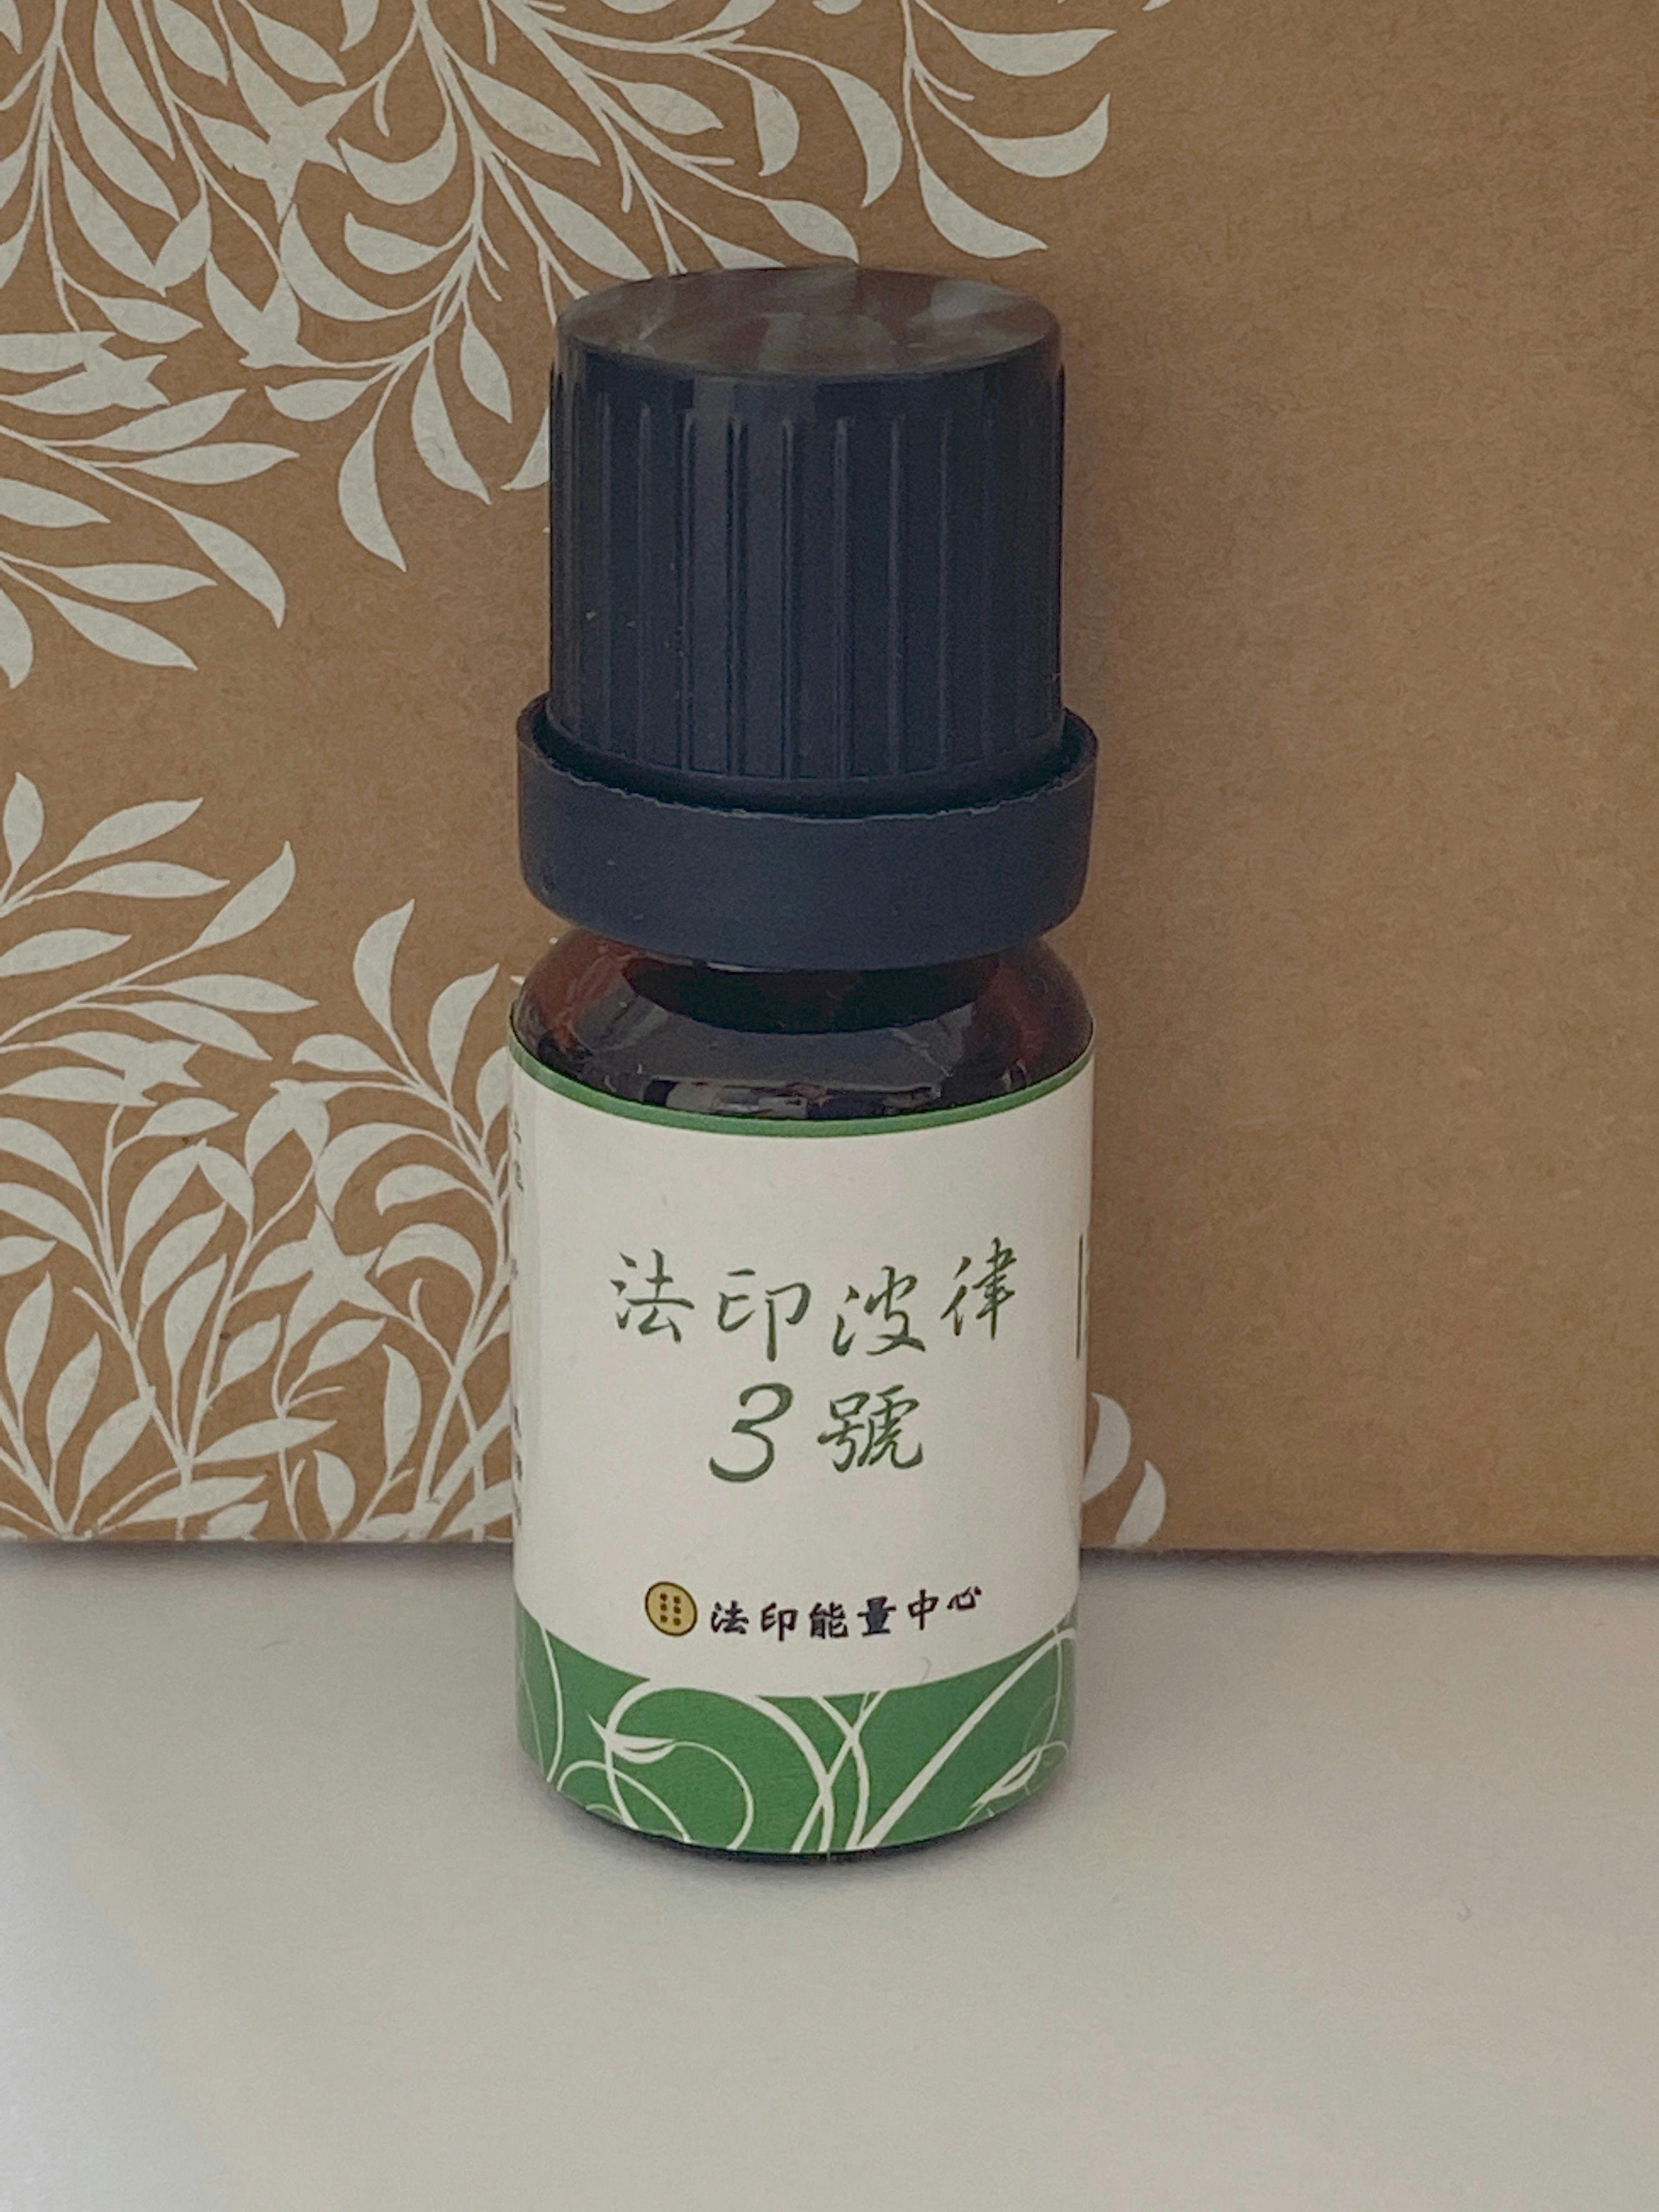 Cover Image for product: 法印 3號 波律精油-10ml